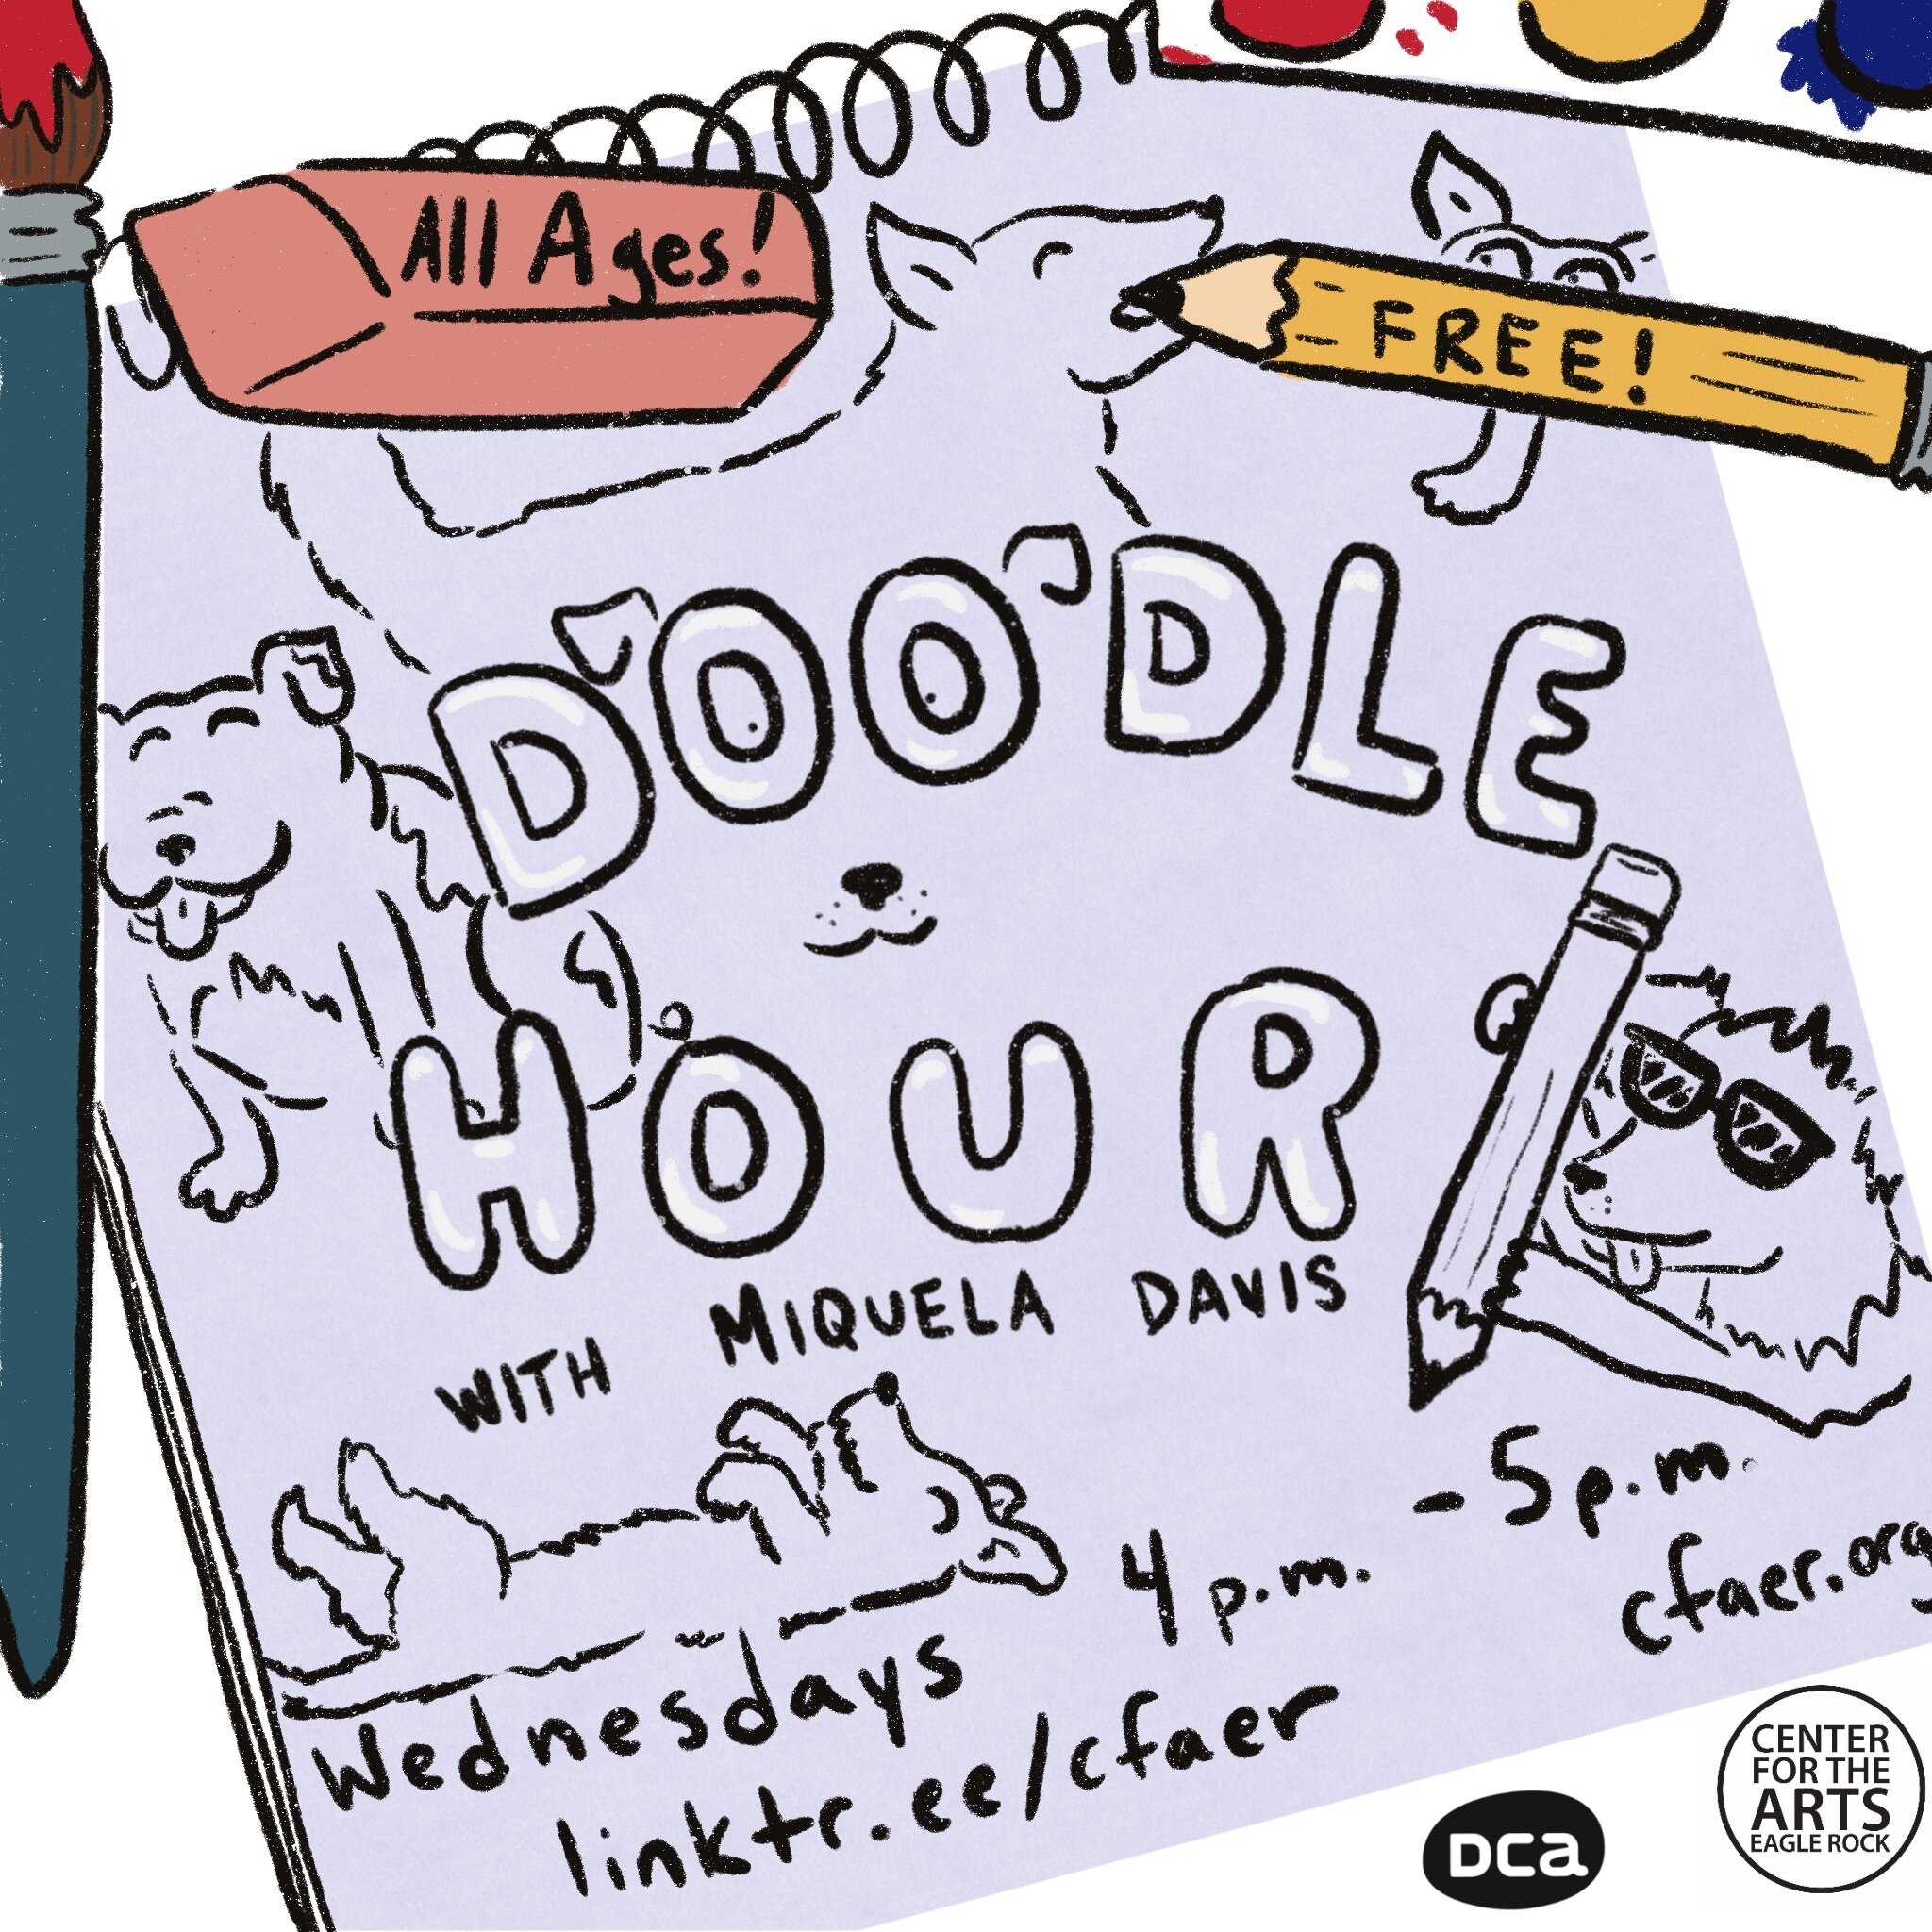 Doodle Hour - on Zoom with Miquela DavisWednesdays: 4 - 5pmAll ages & free!Join artist Miquela Davis for an hour of doodling on Zoom every Wednesday from 4 to 5pm, free!